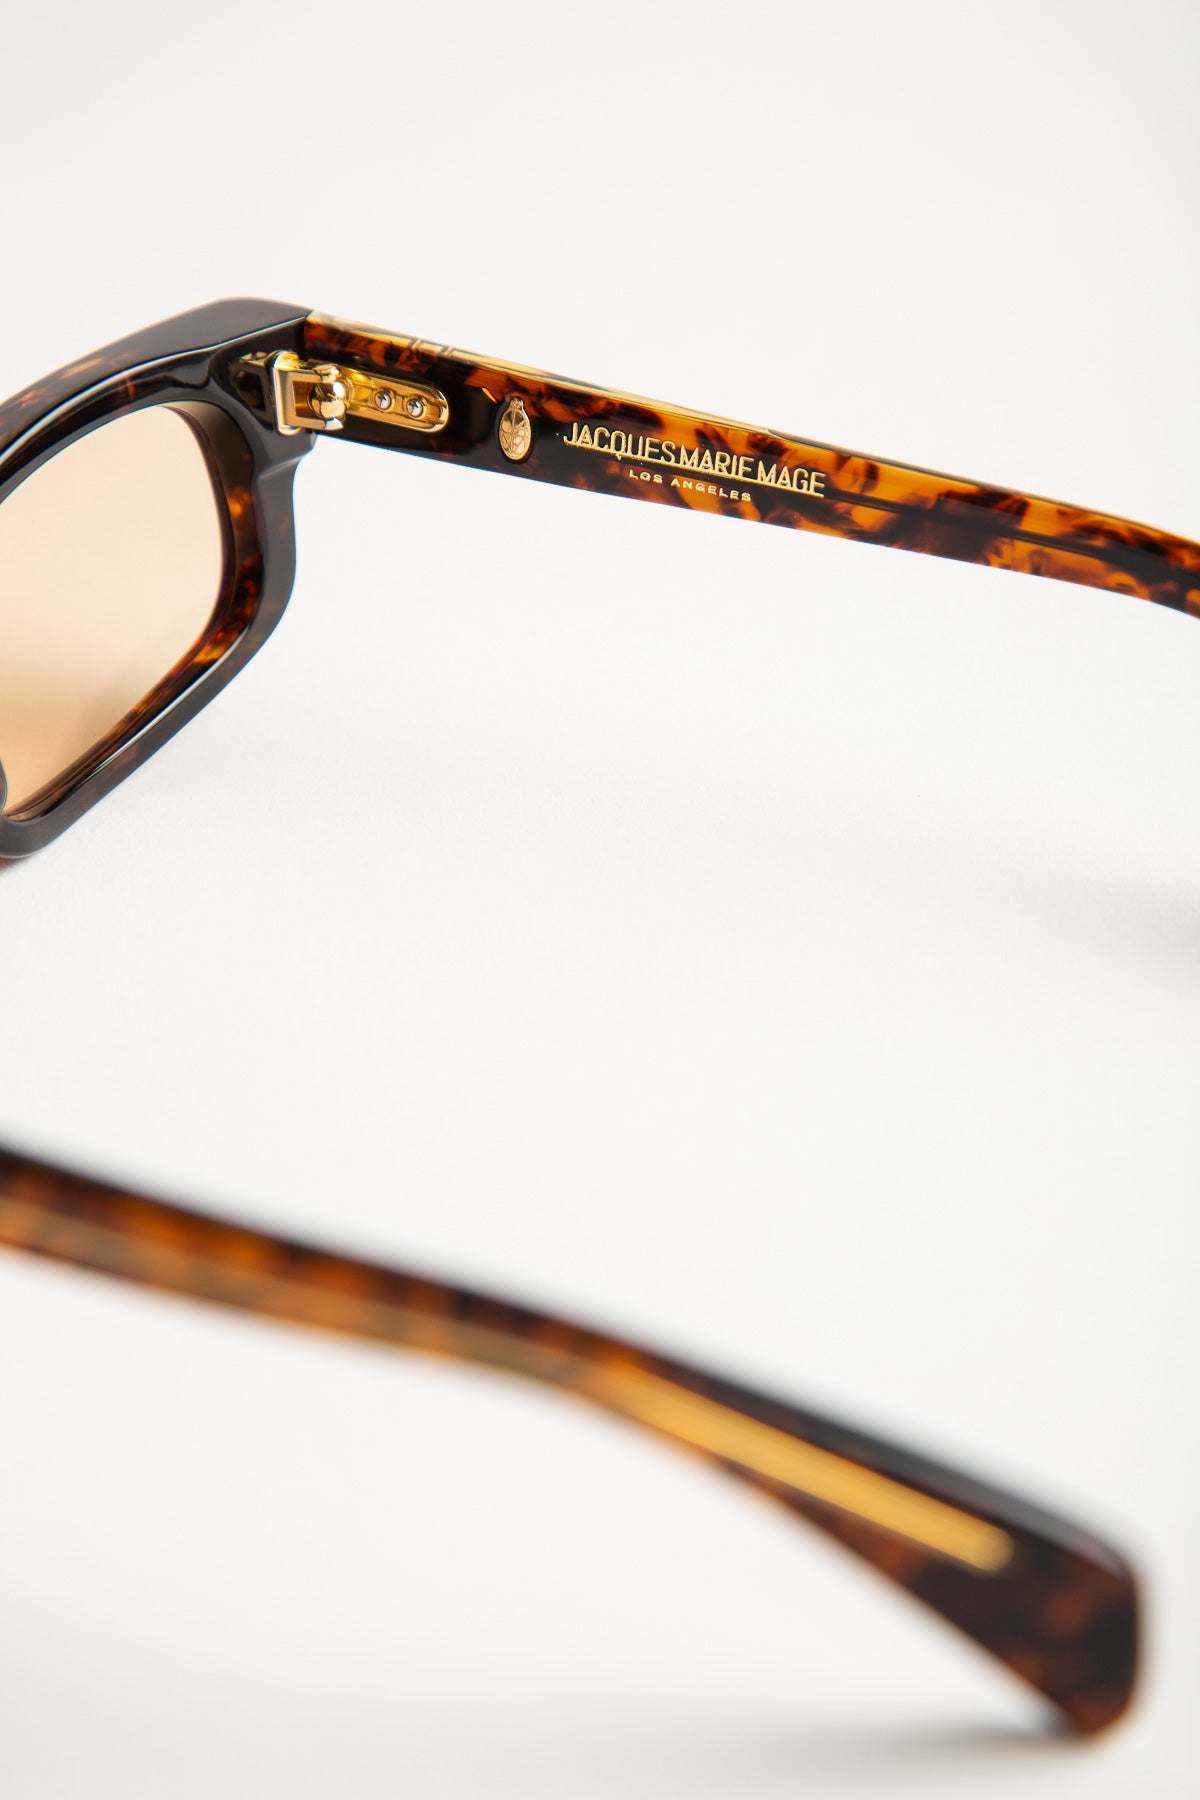 JACQUES MARIE MAGE | INITIALS SUNGLASSES